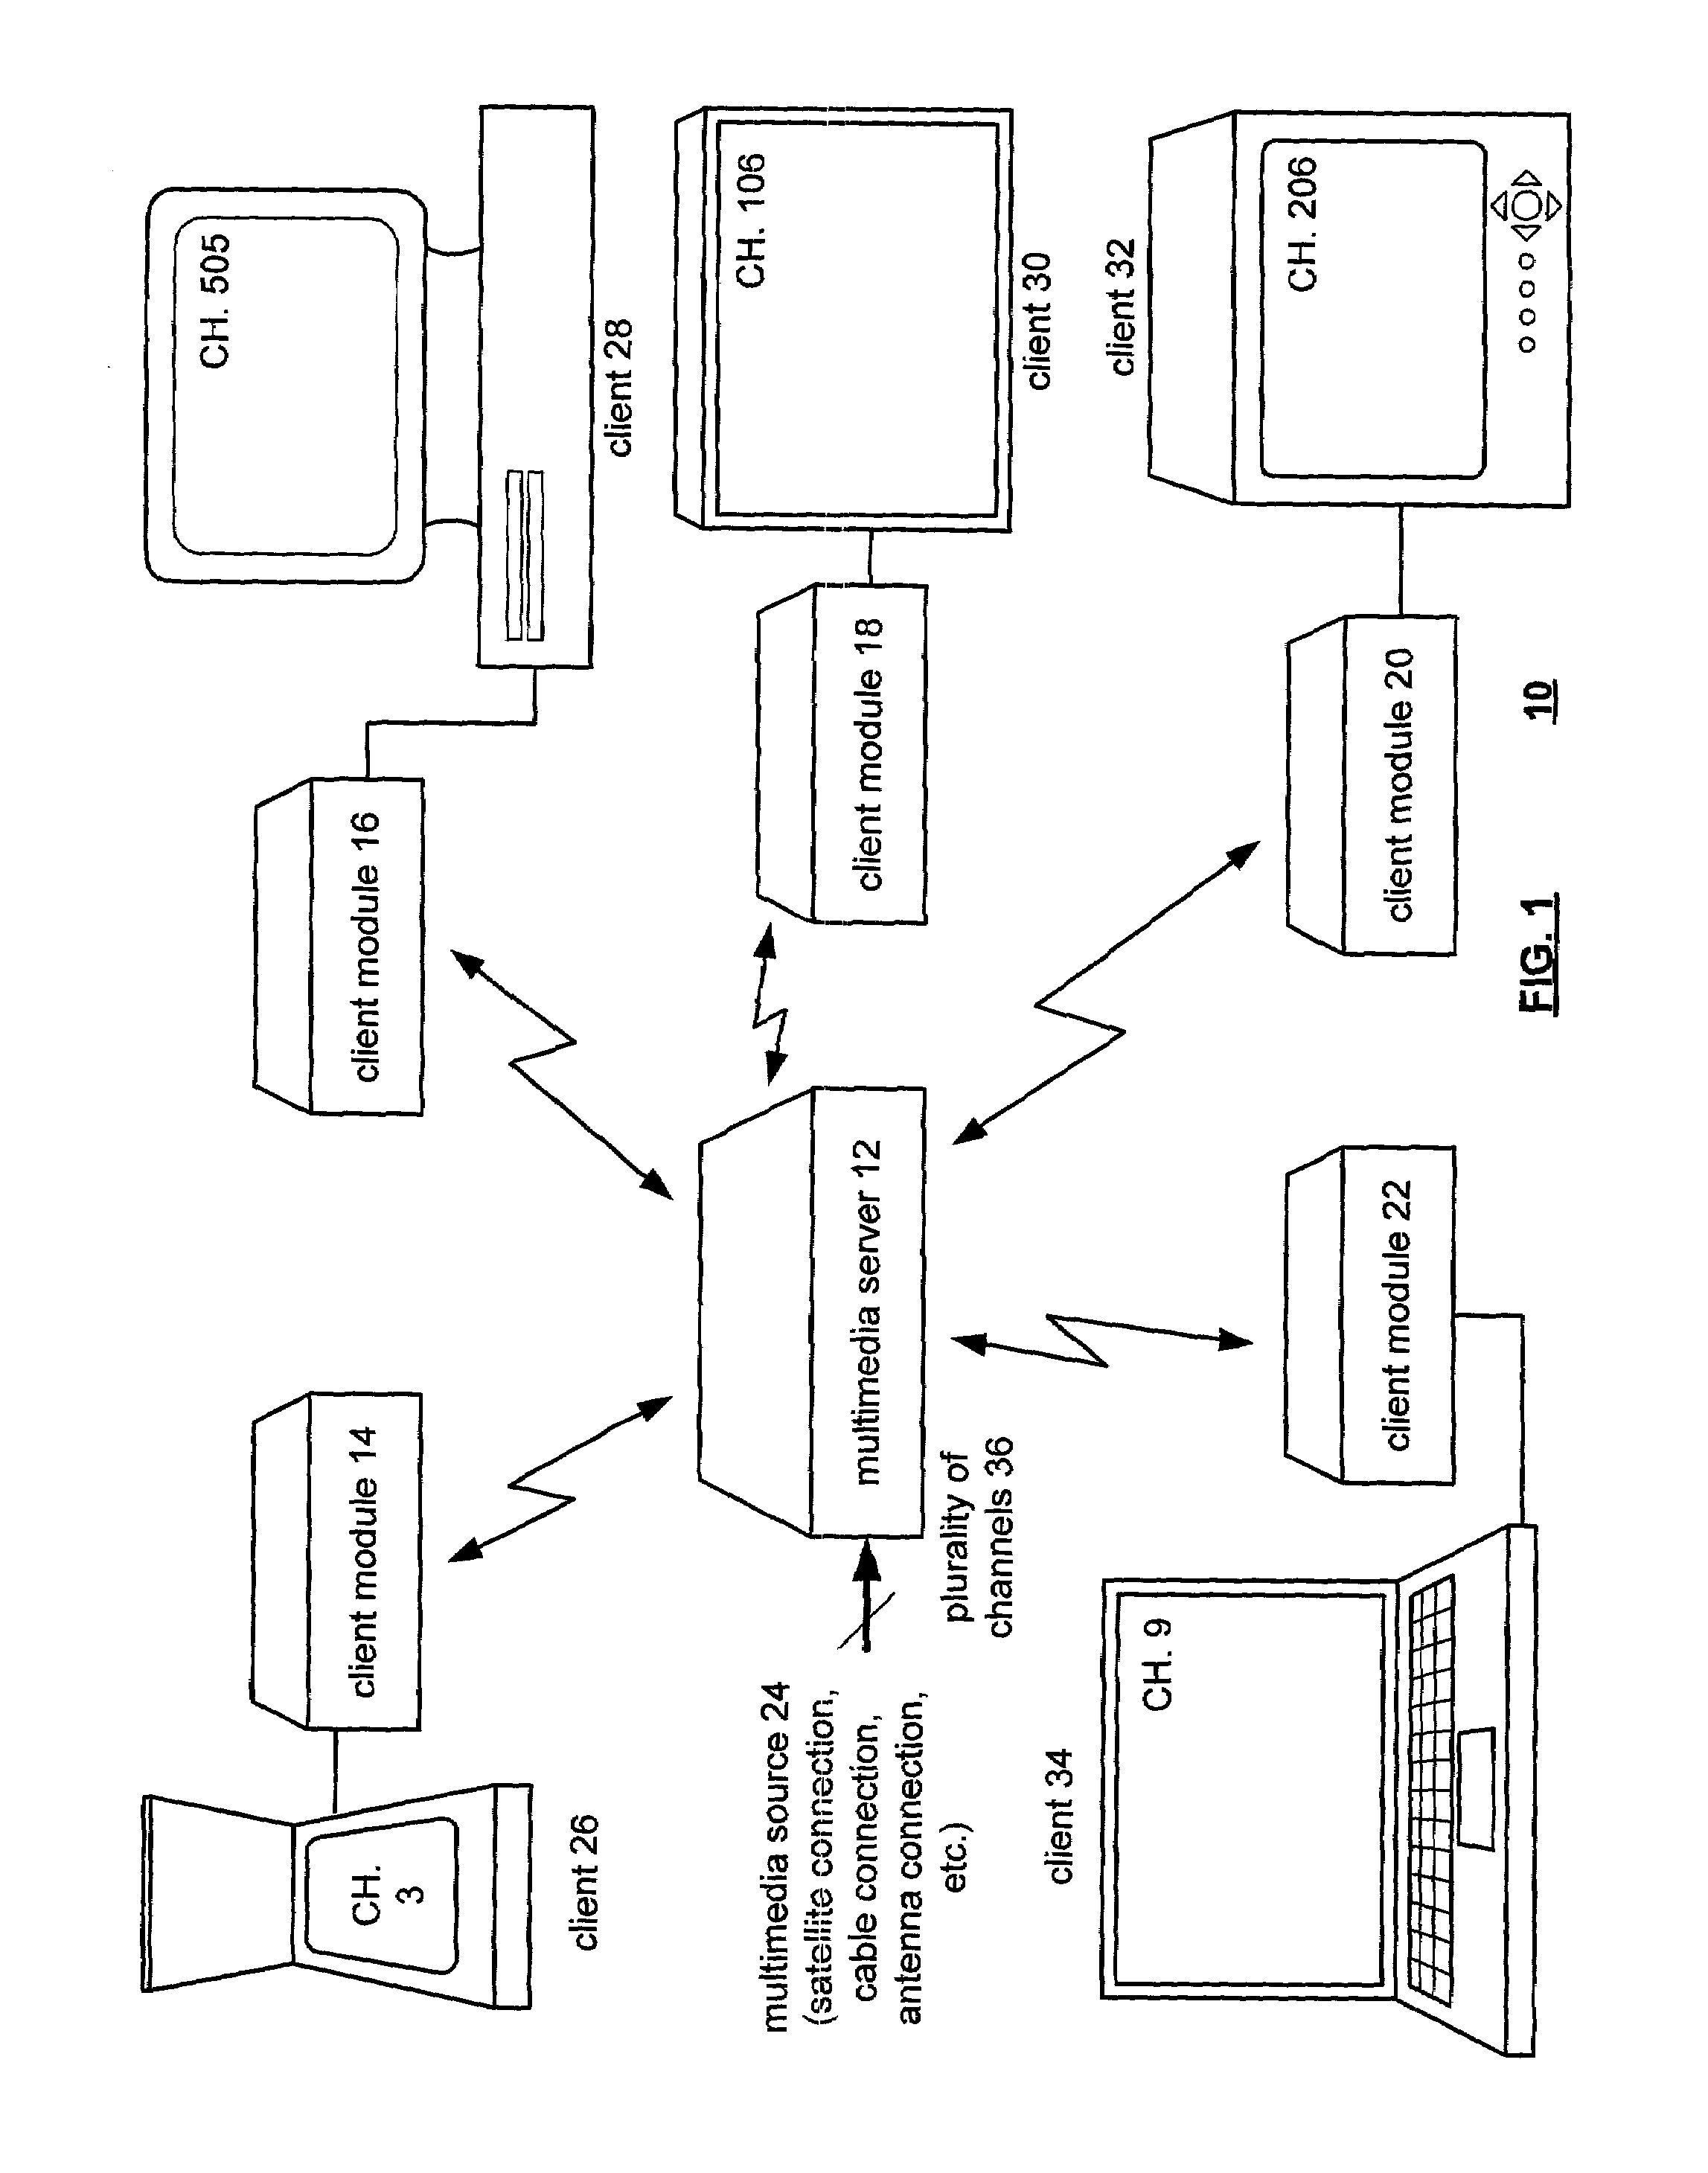 Method and apparatus of multiplexing a plurality of channels in a multimedia system